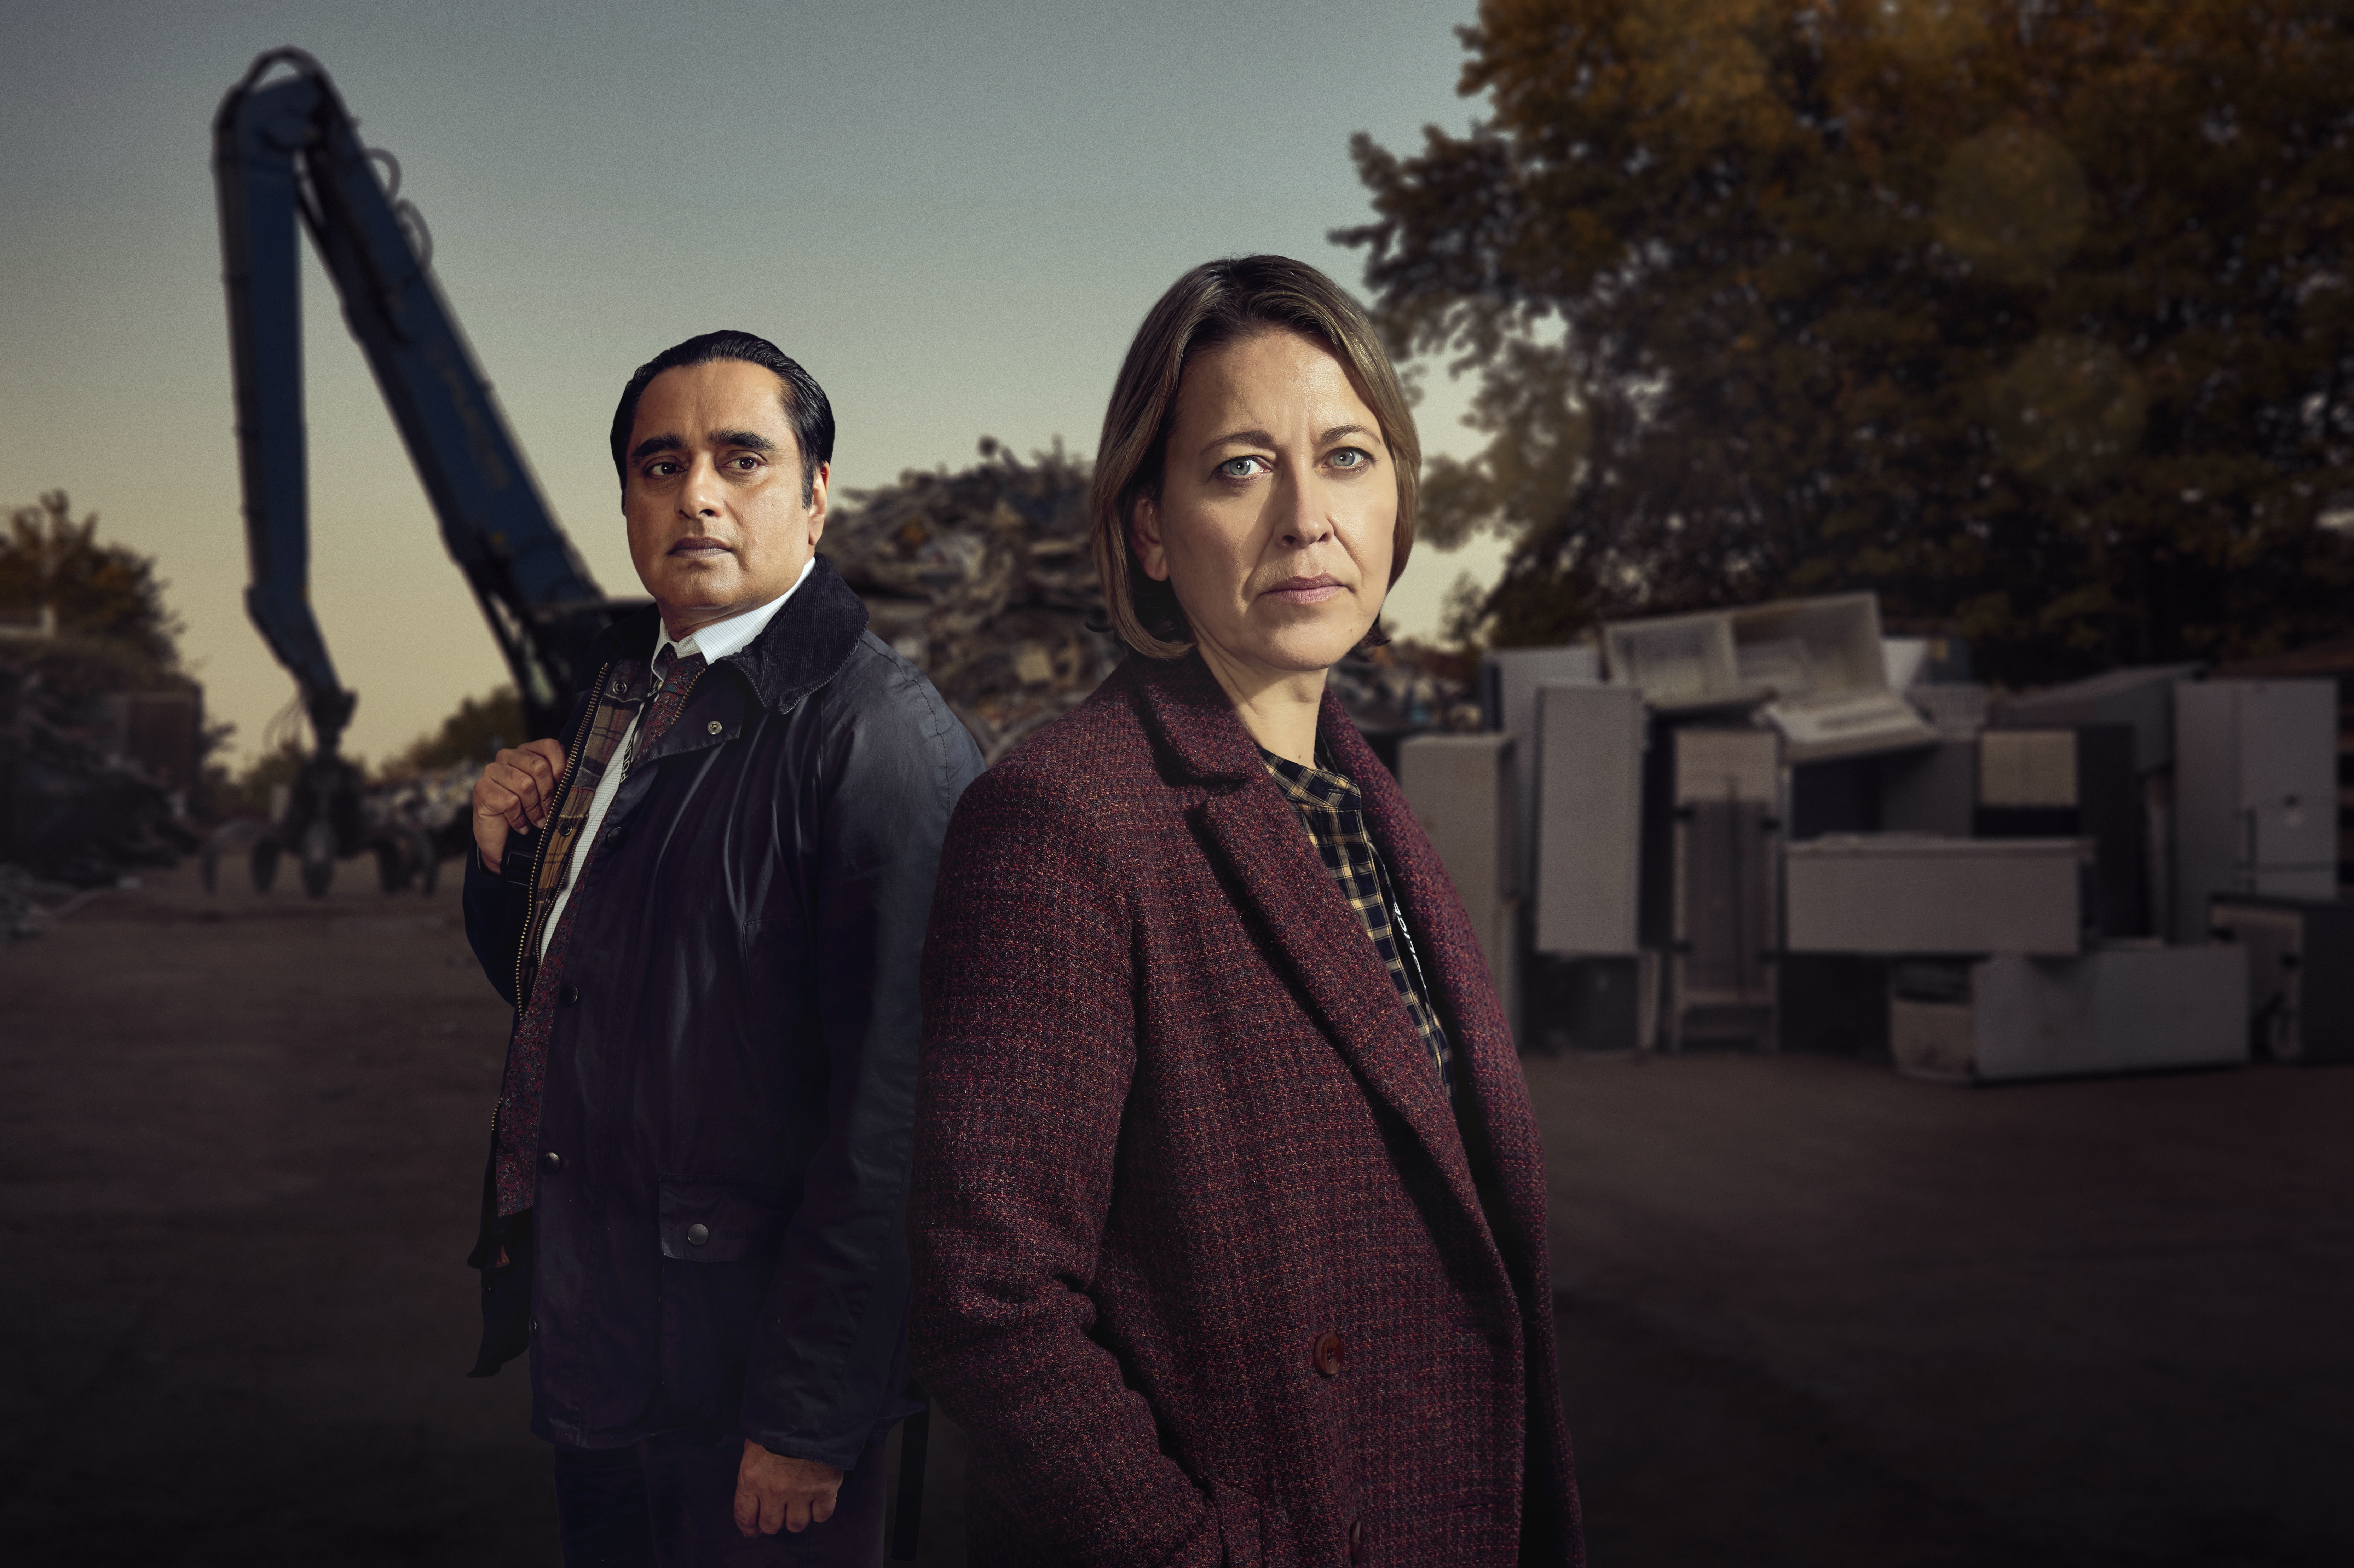 Sunny (Sanjeev Bhaskar) and Cassie (Nicola Walker) head up a police unit in charge of cold cases in the series Unforgotten. Mainstreet Pictures LTD